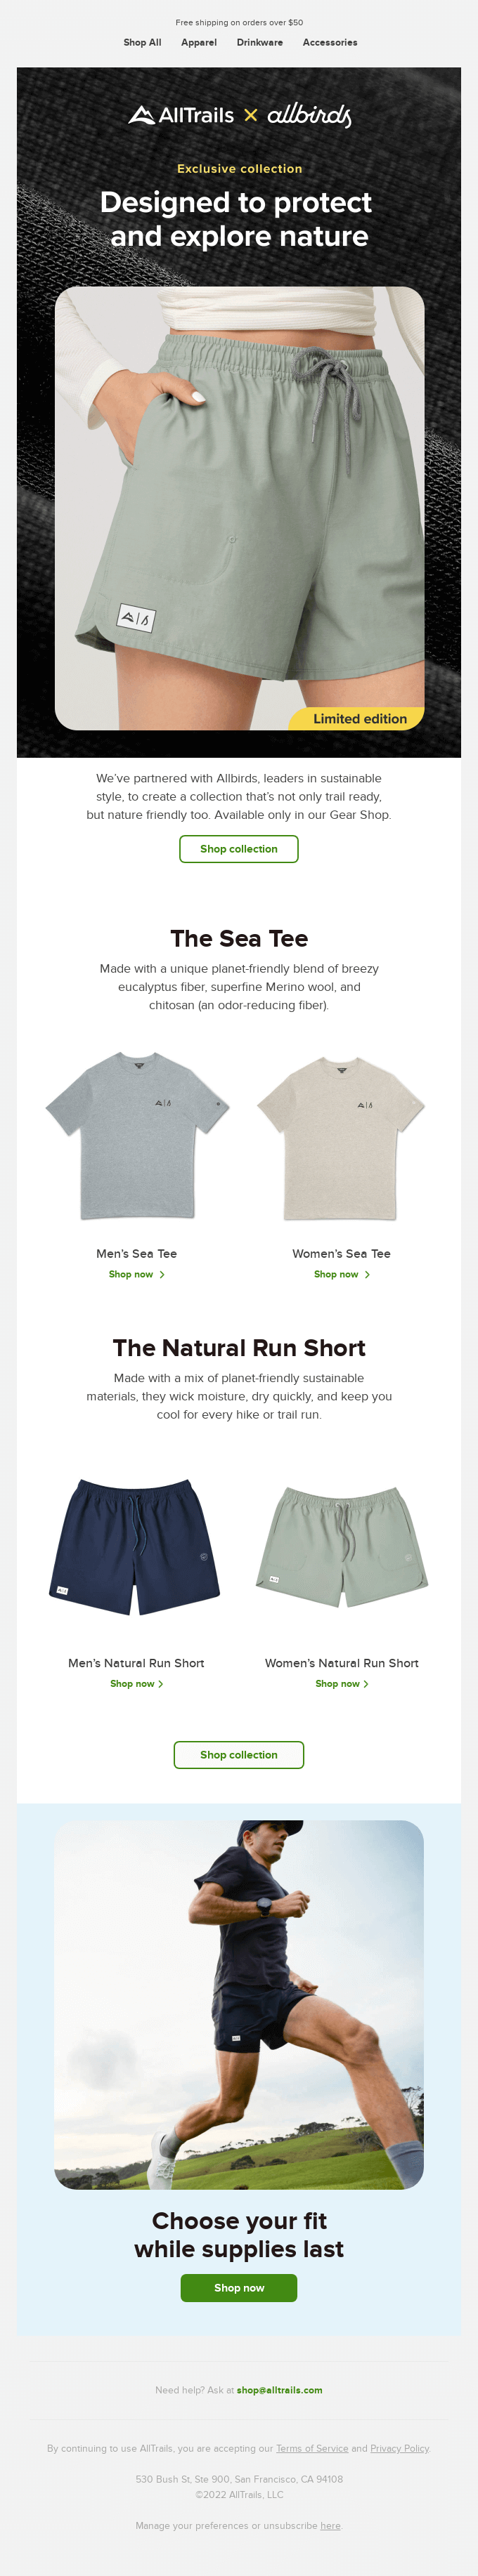 Allbirds product email with relevant sustainability message.